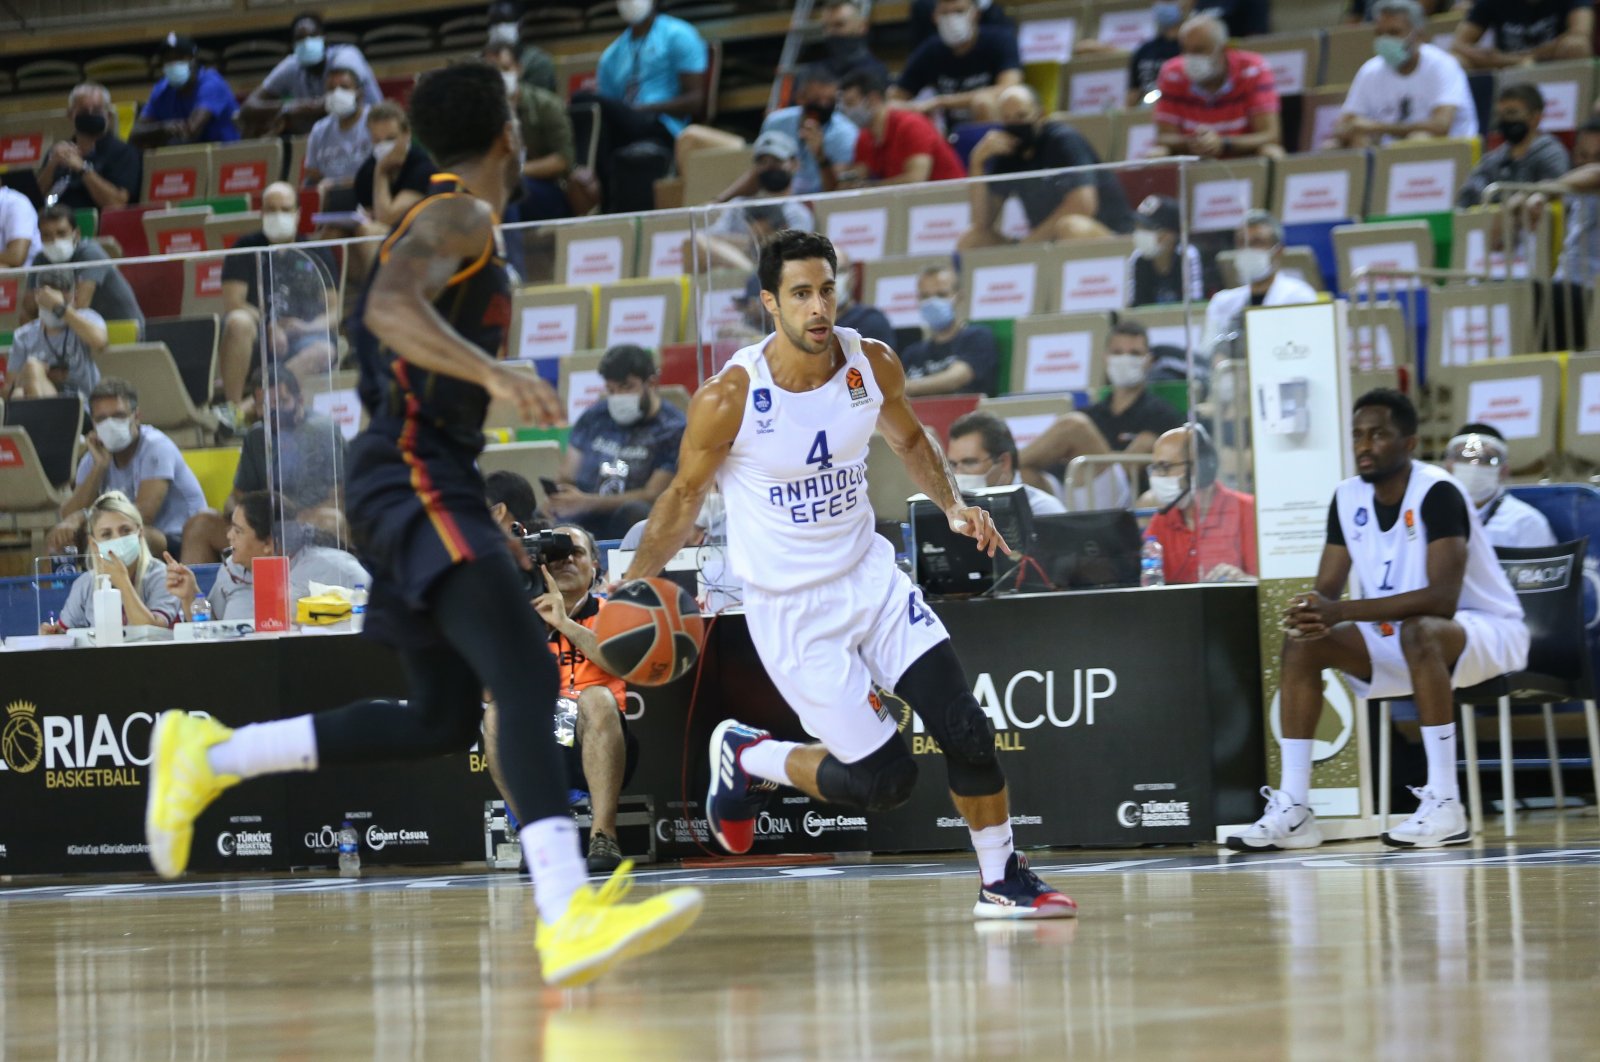 Doğuş Balbay of Anadolu Efes dribbles the ball during a match in Gloria Cup tournament, in Antalya, southern Turkey, Sept. 8, 2020. (AA Photo) 